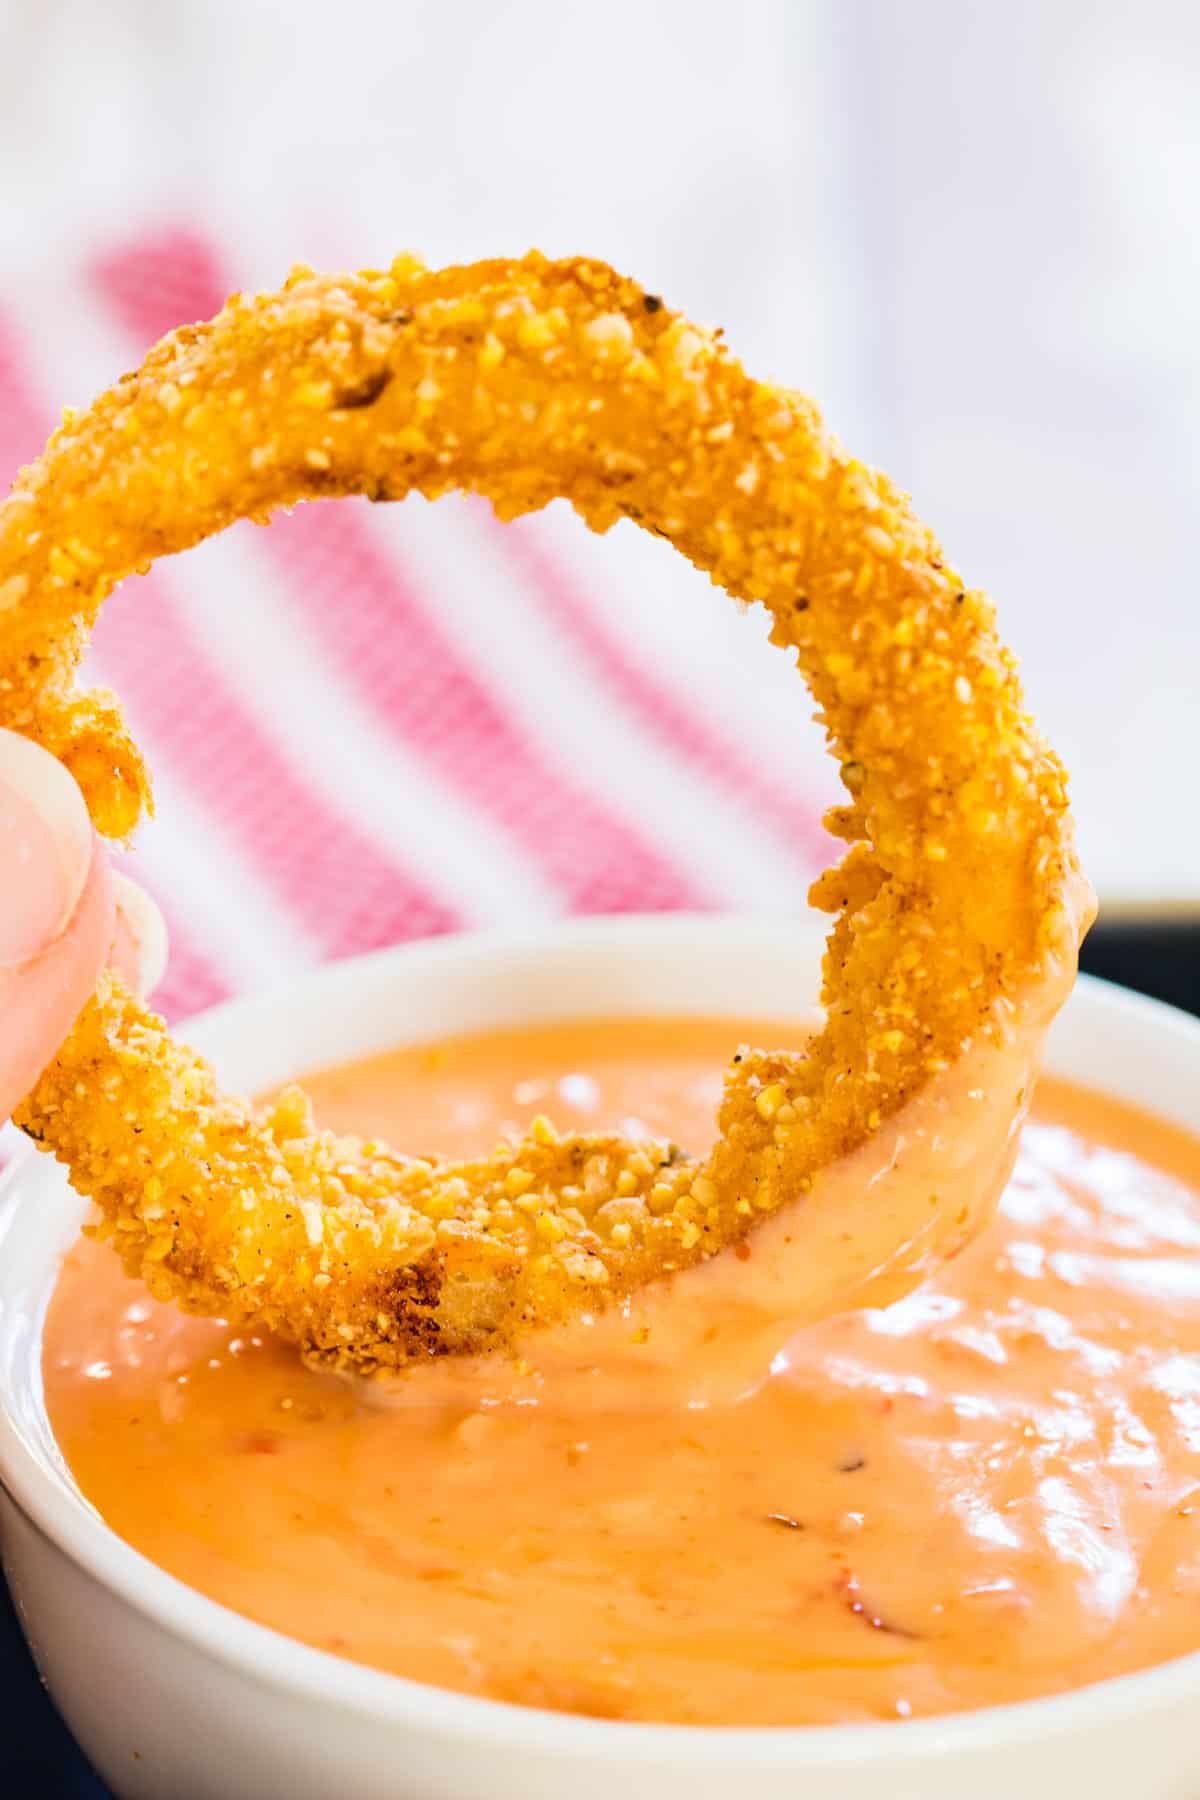 Fingers dipping a crispy air fryer onion ring into a bowl of dipping sauce.